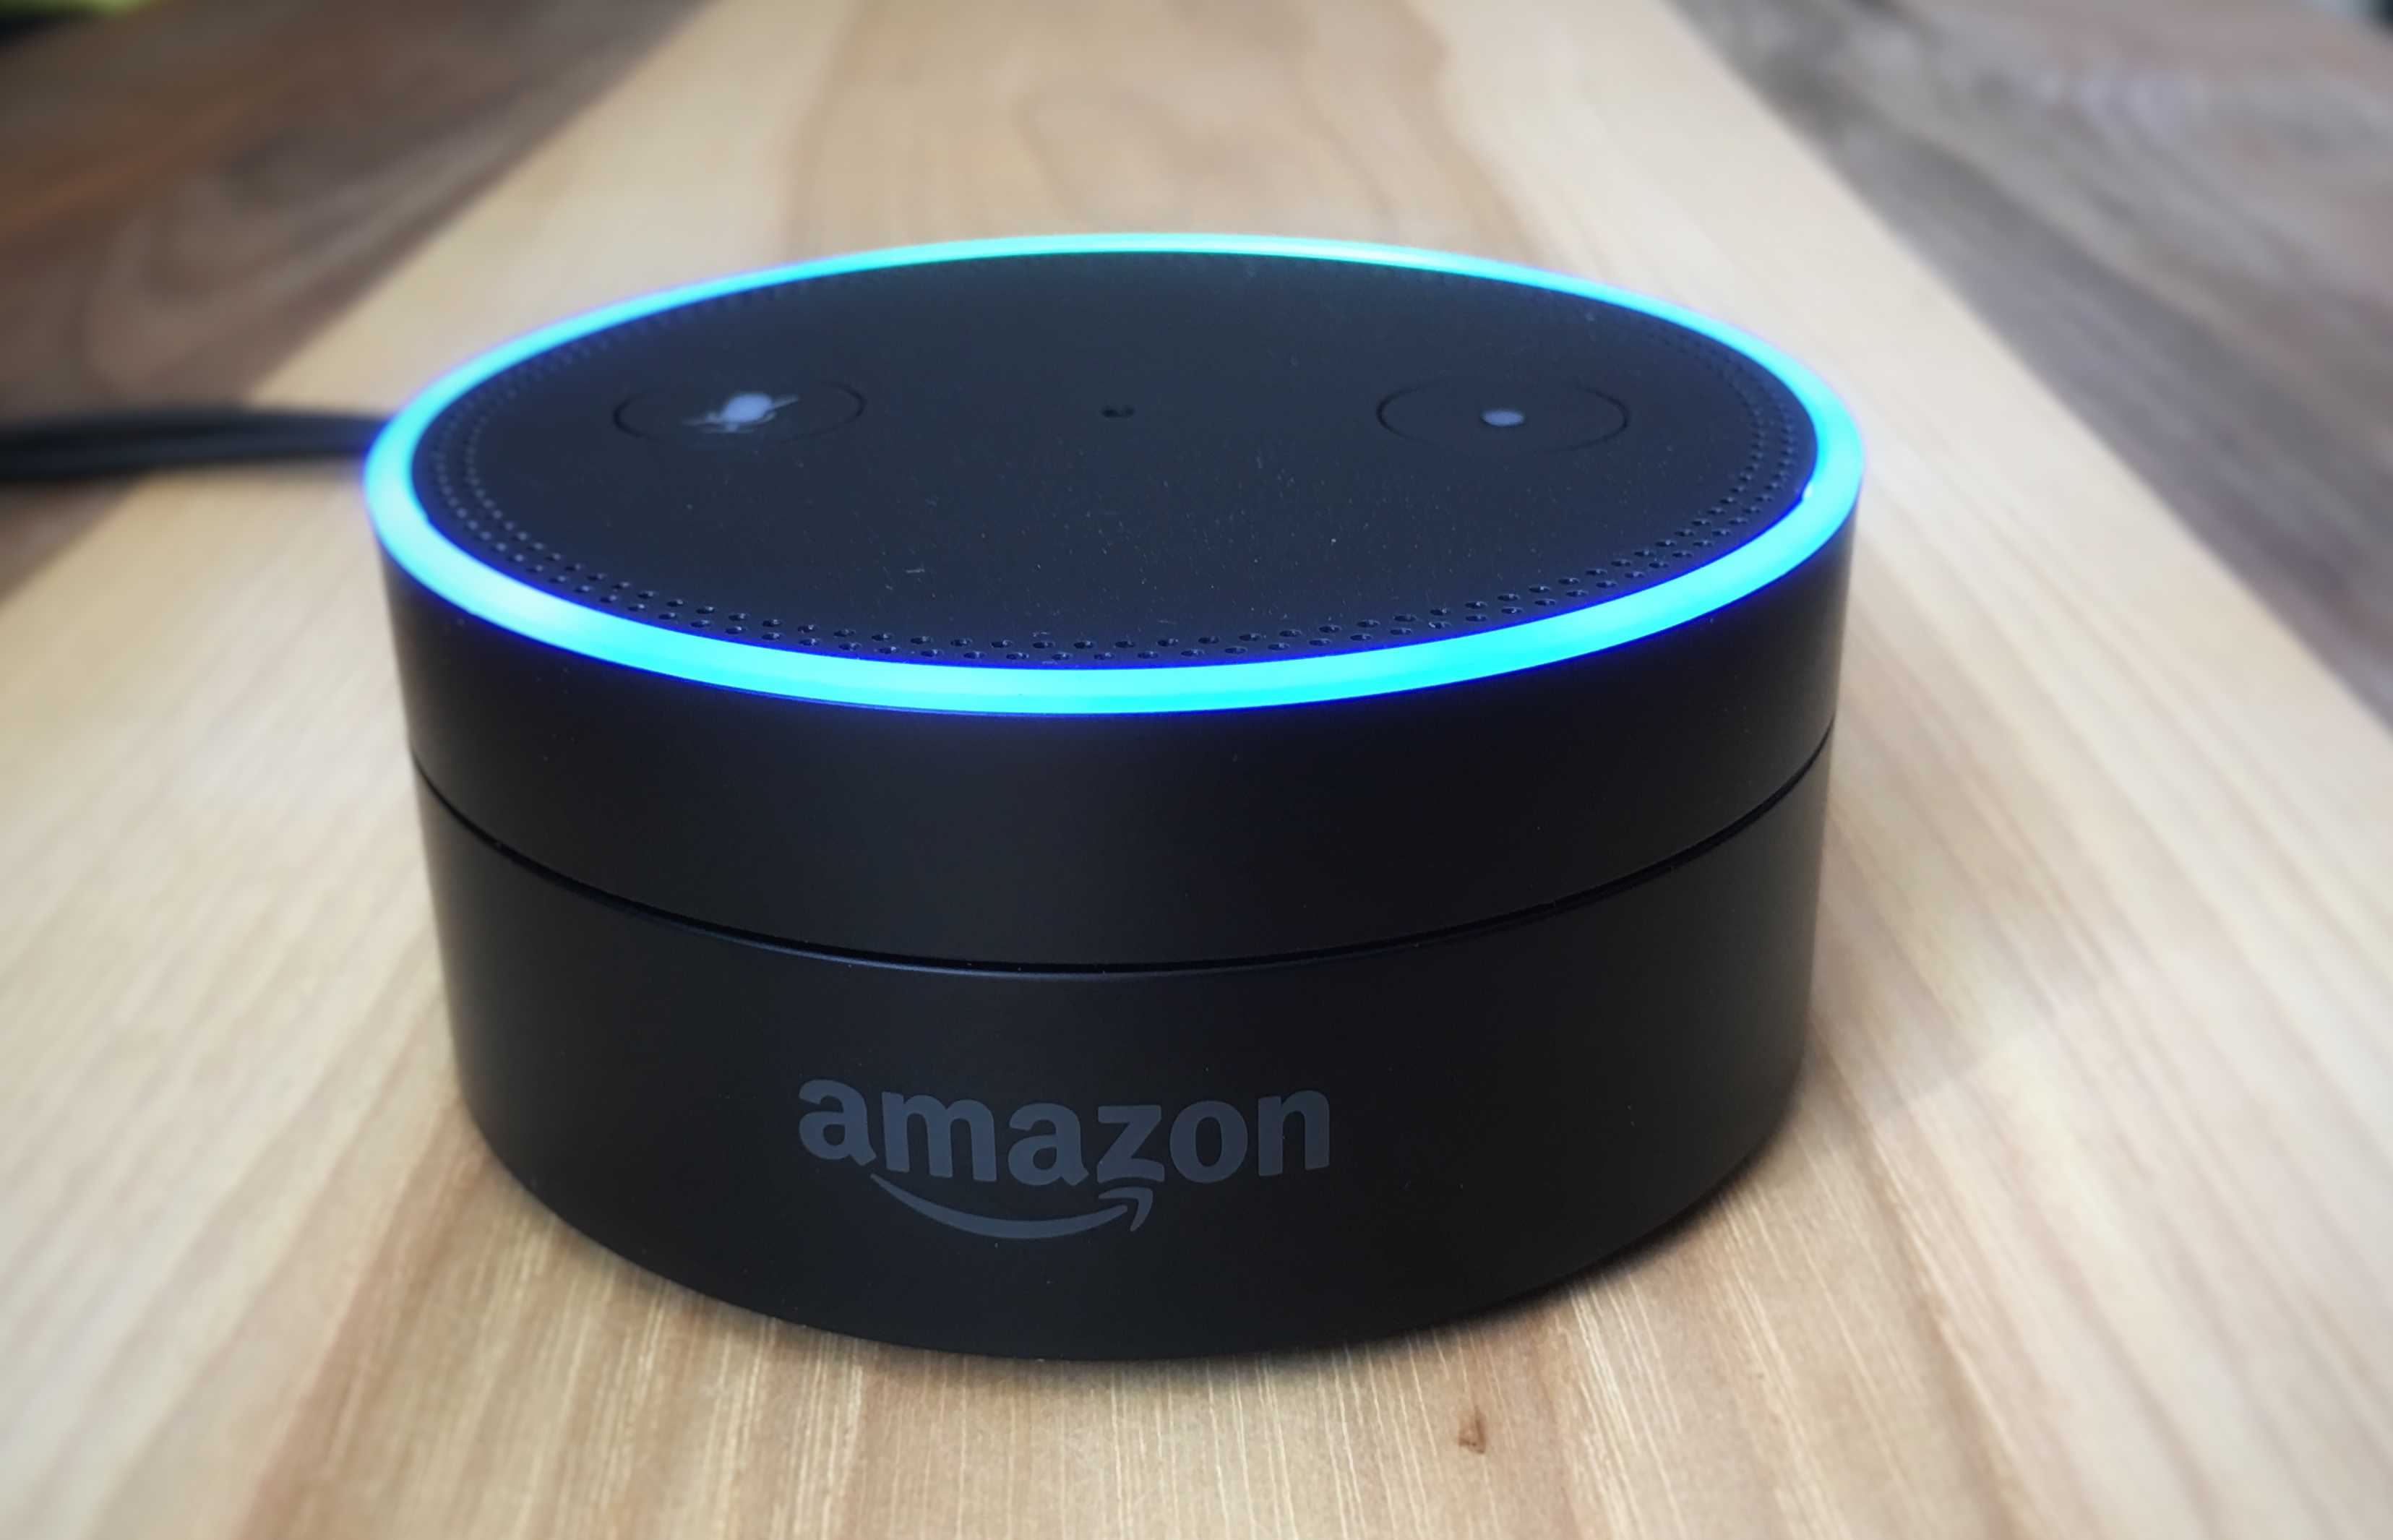 Alexa assistant can now differentiate between voices